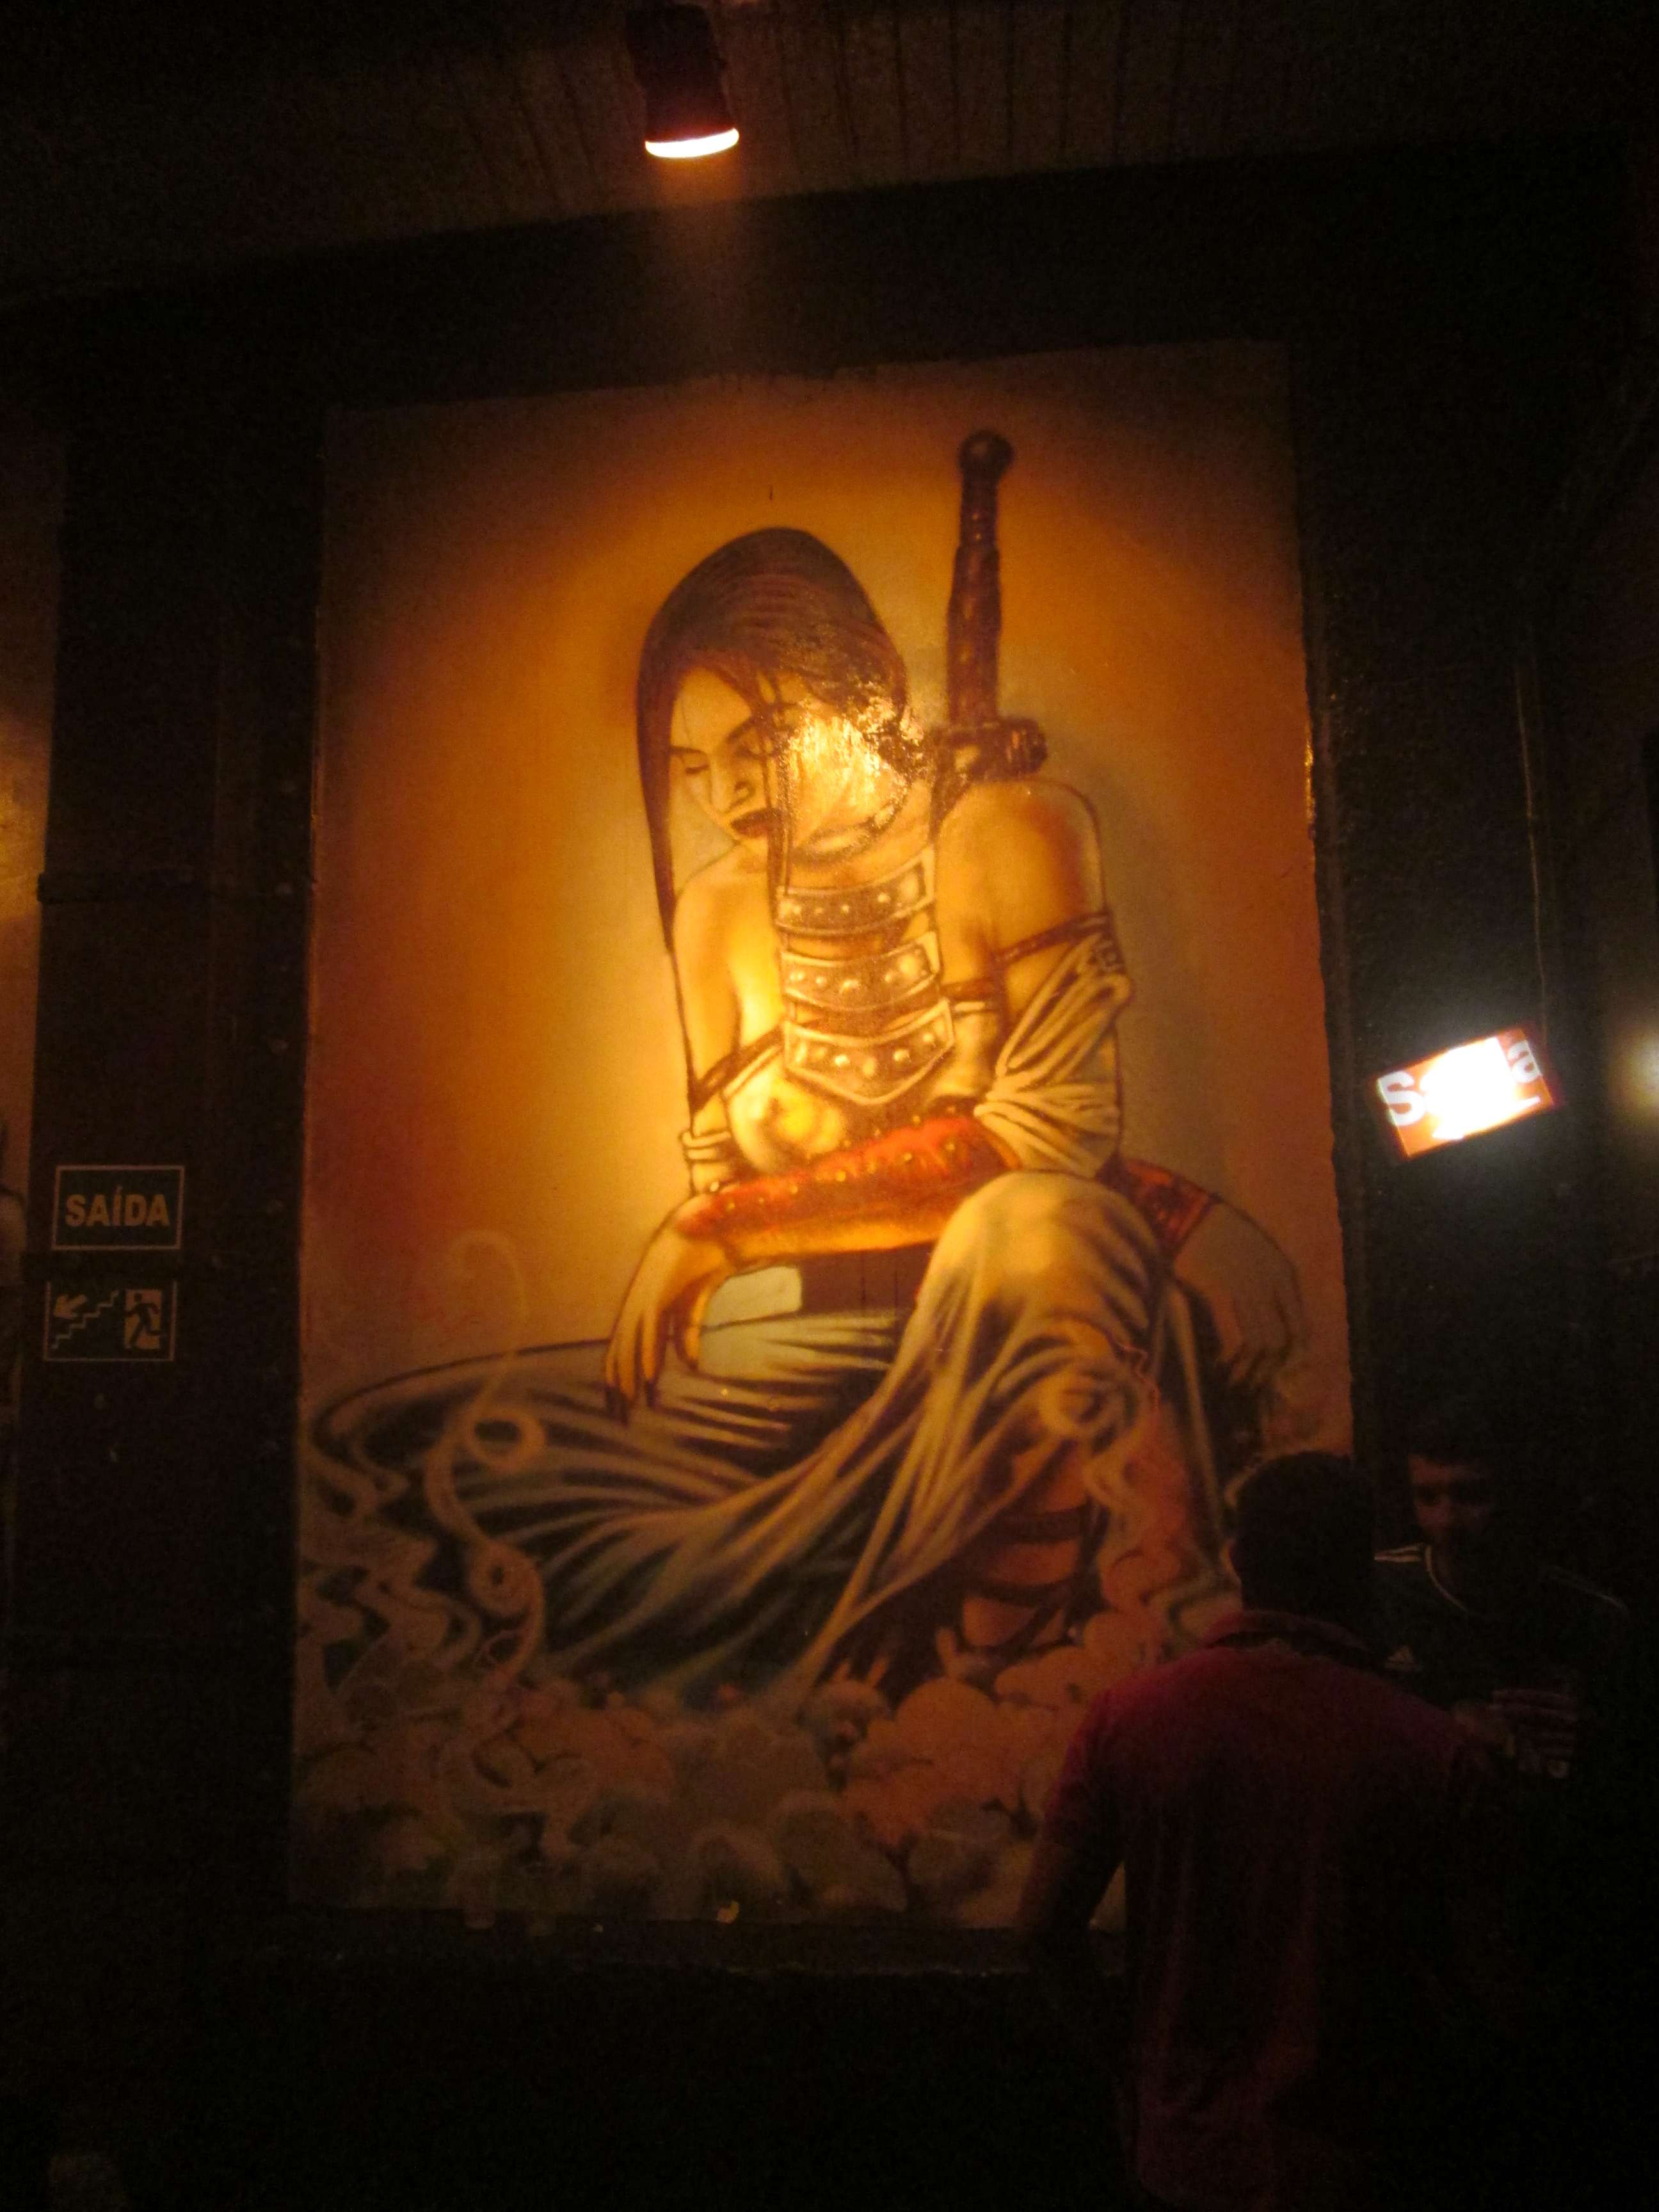 Samurai girl mural in the stairwell of the club